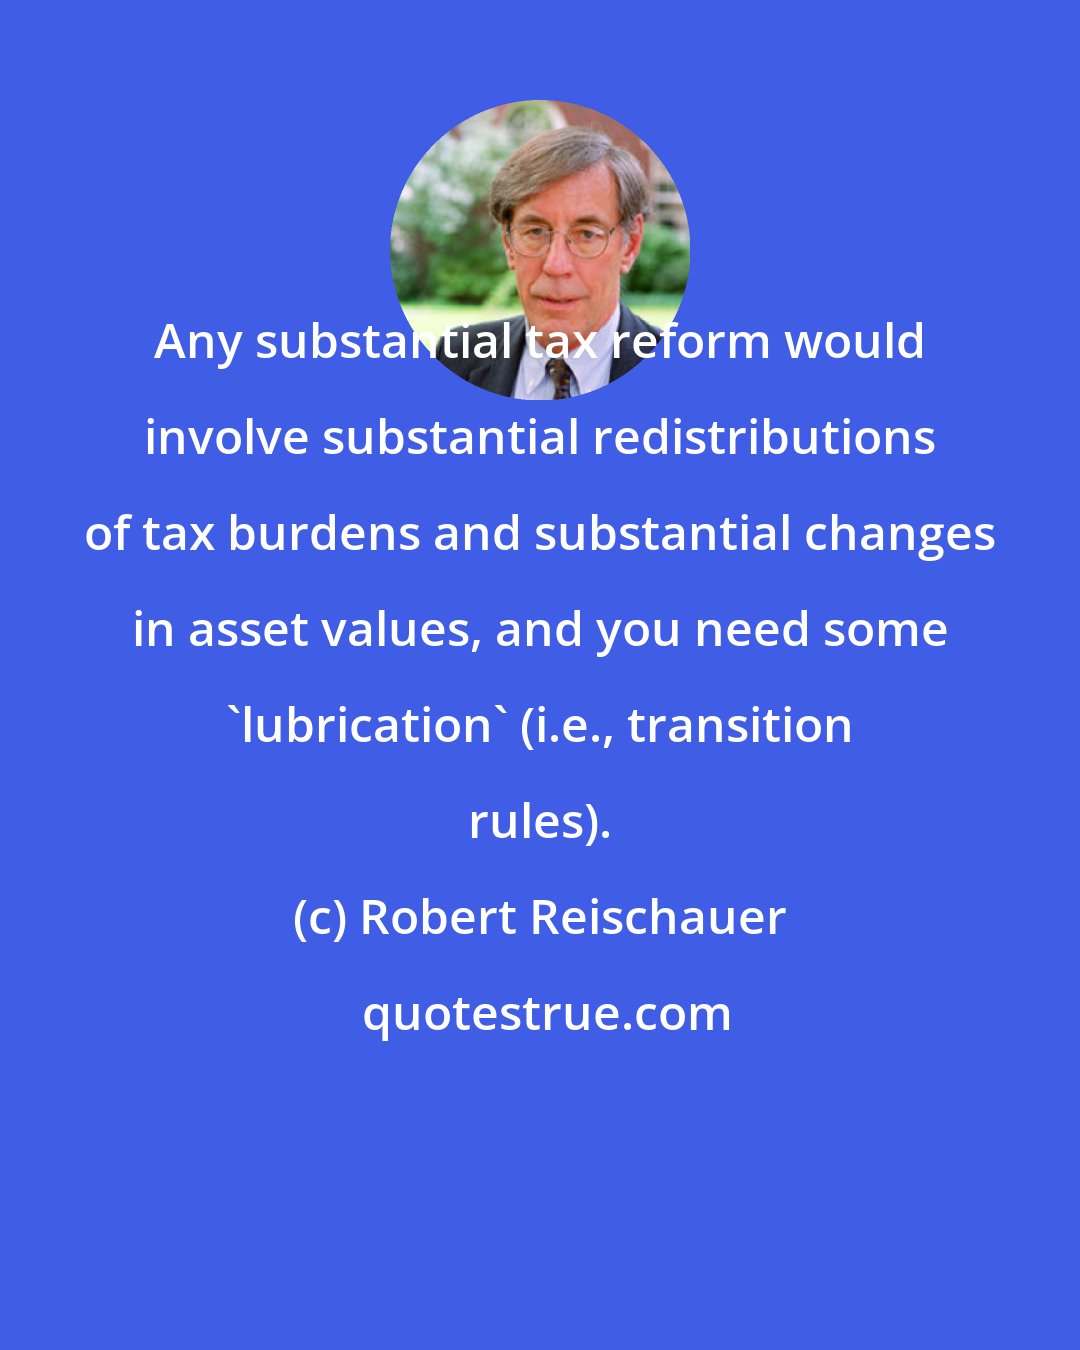 Robert Reischauer: Any substantial tax reform would involve substantial redistributions of tax burdens and substantial changes in asset values, and you need some 'lubrication' (i.e., transition rules).